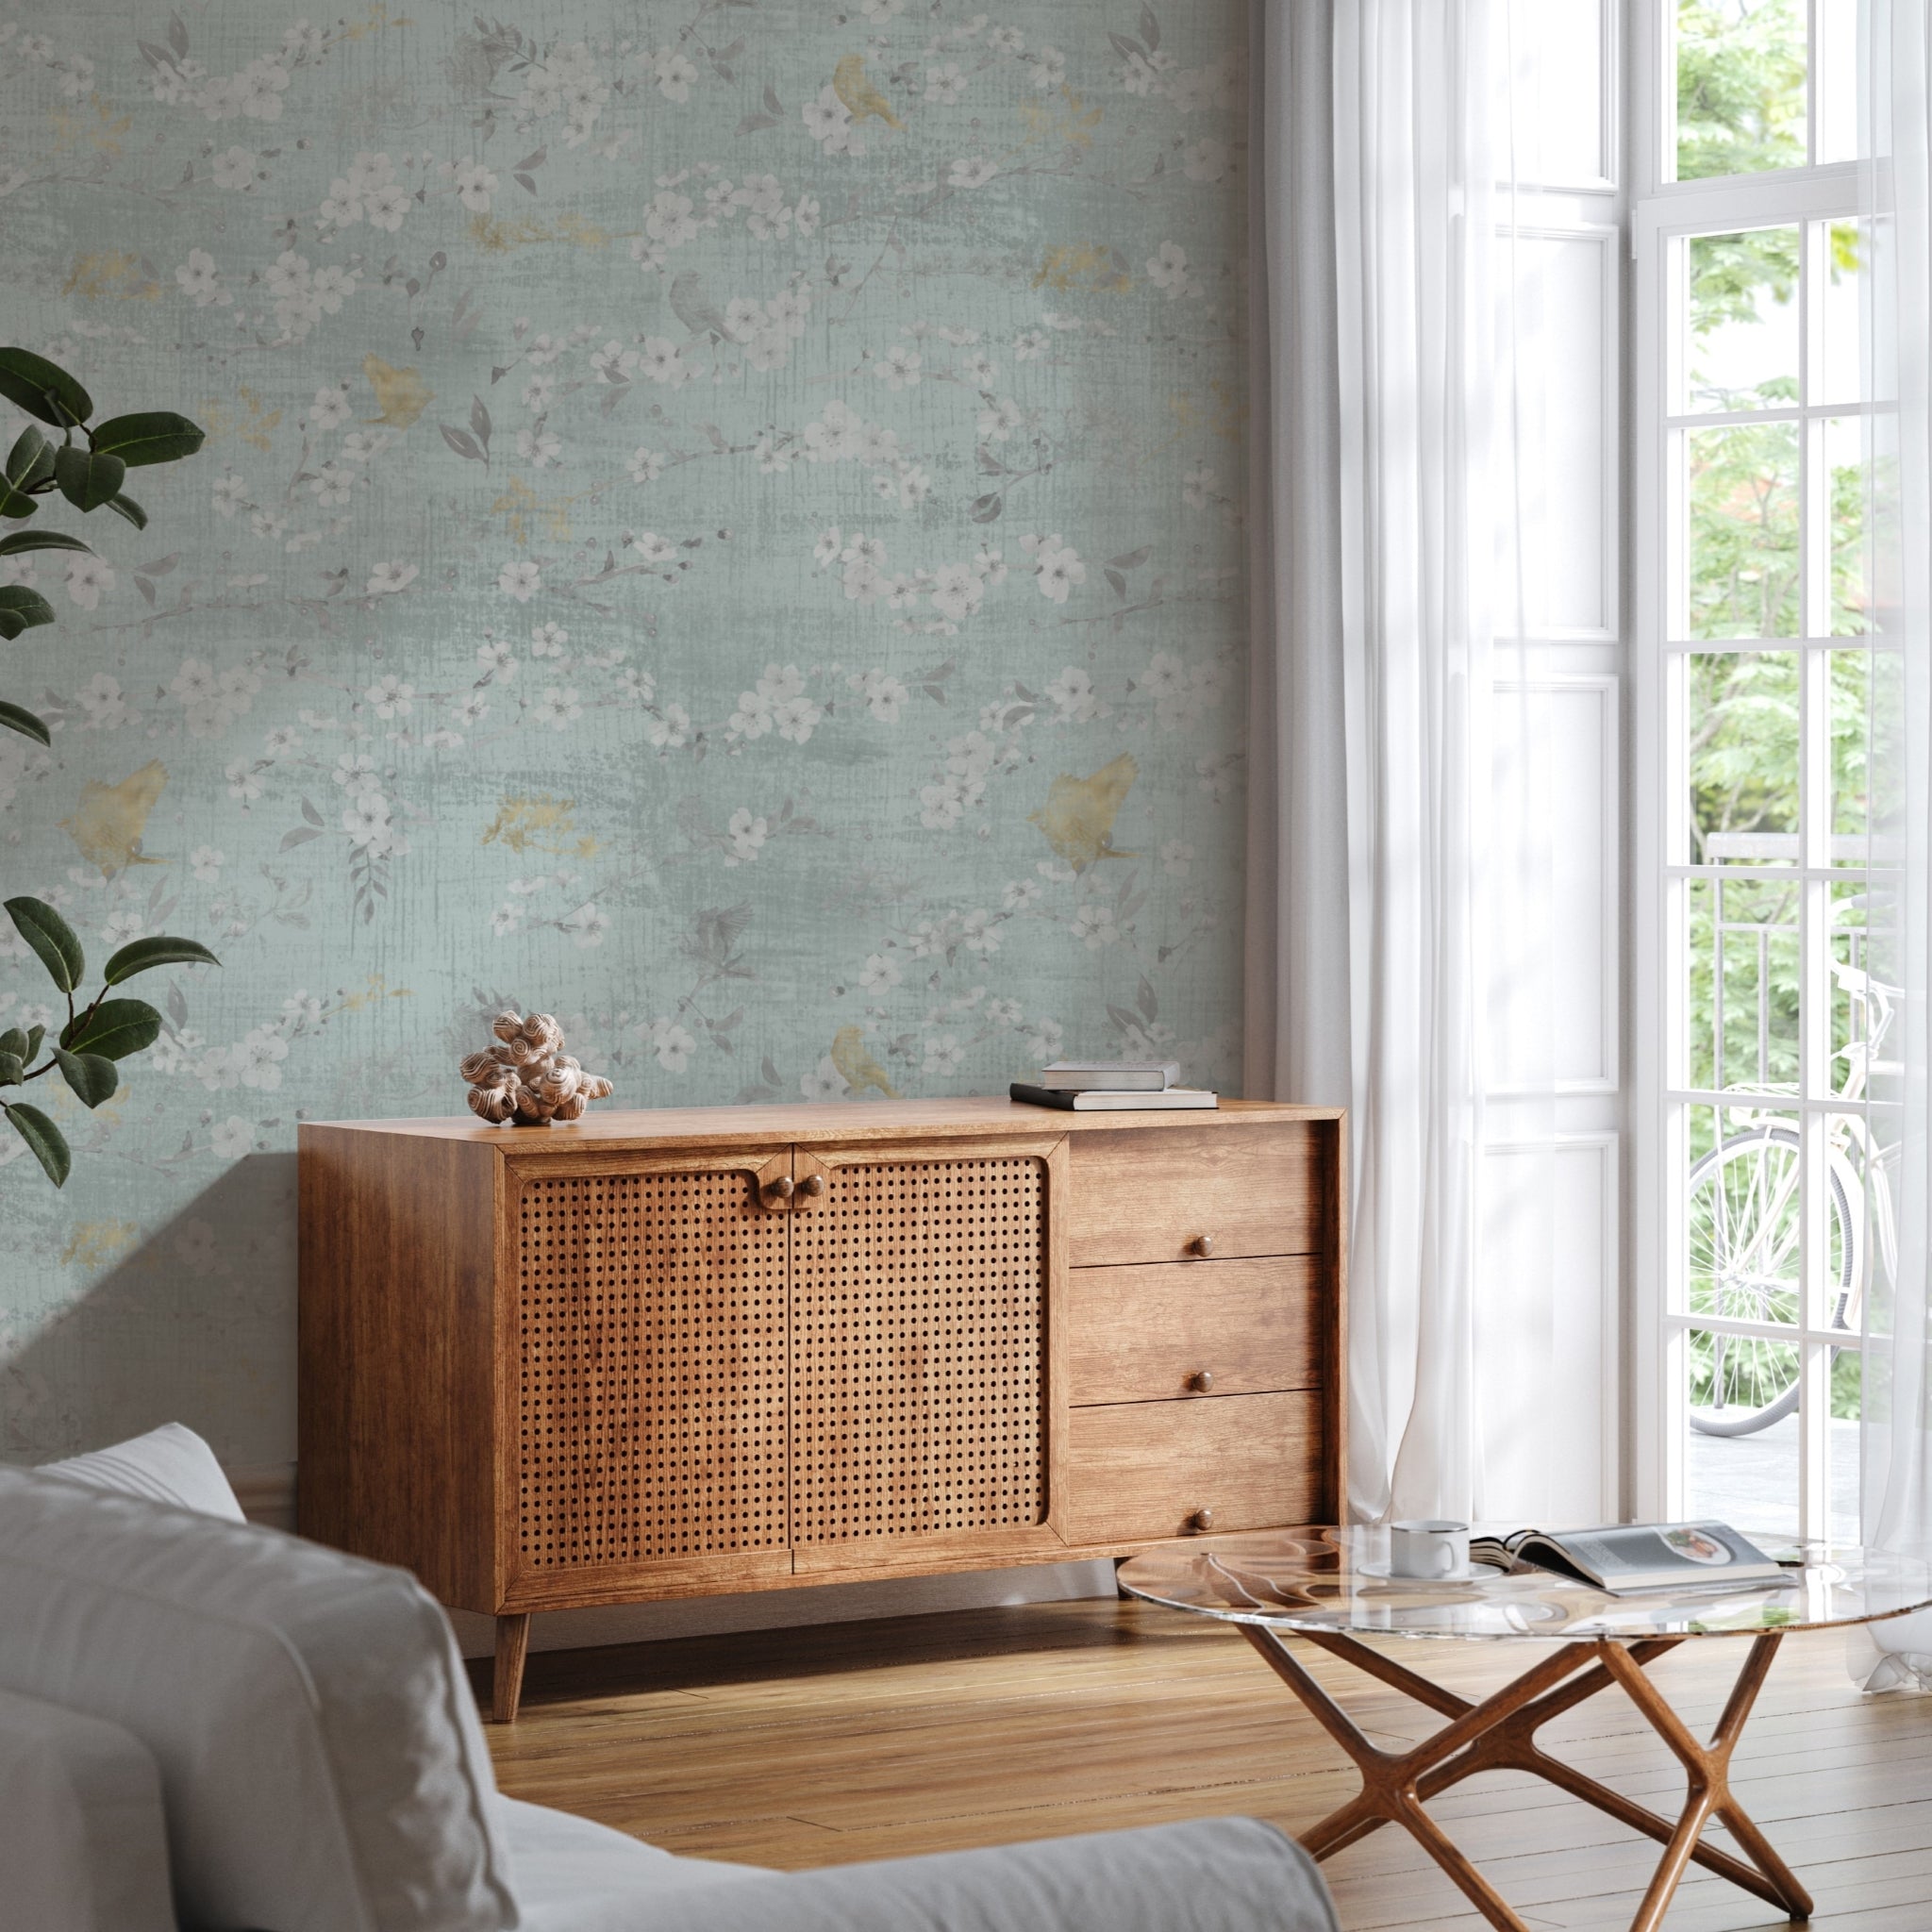 "Kinsbeth Wallpaper by Wall Blush in a stylish living room, highlighting the elegant floral pattern."